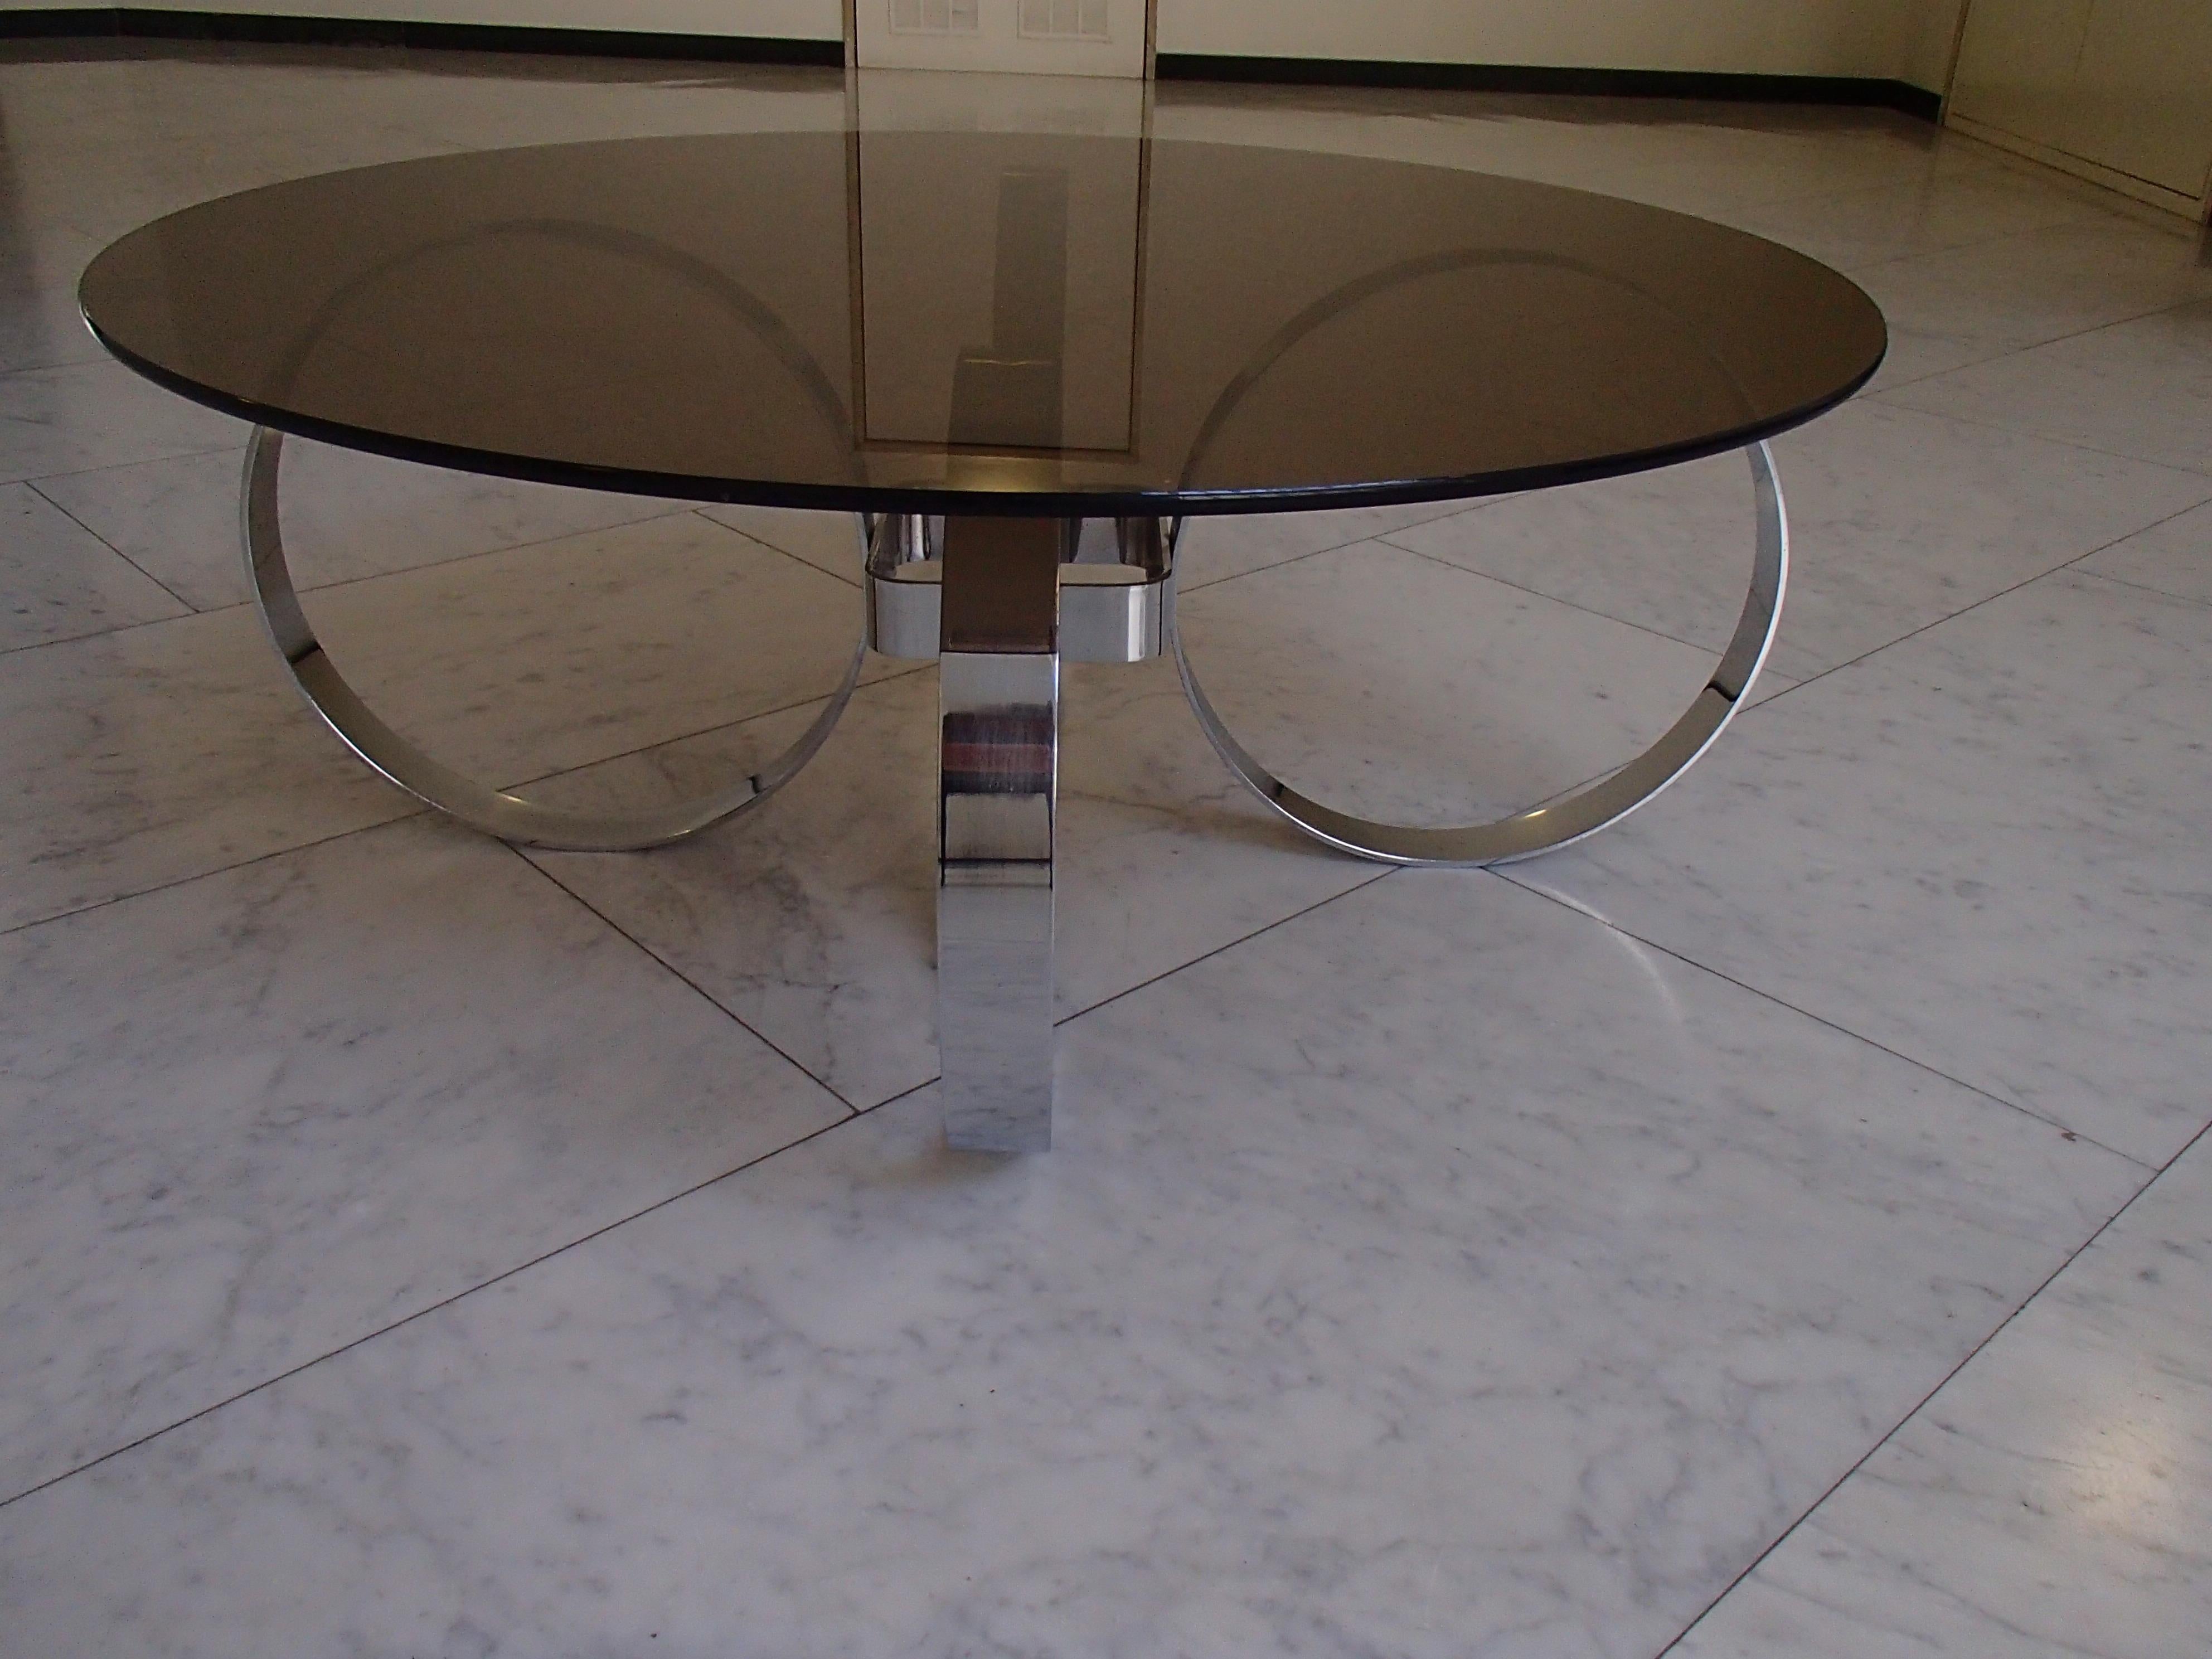 Late 20th Century Mid-Century Modern Low Table Chrome Rings and Brown Glass Top For Sale